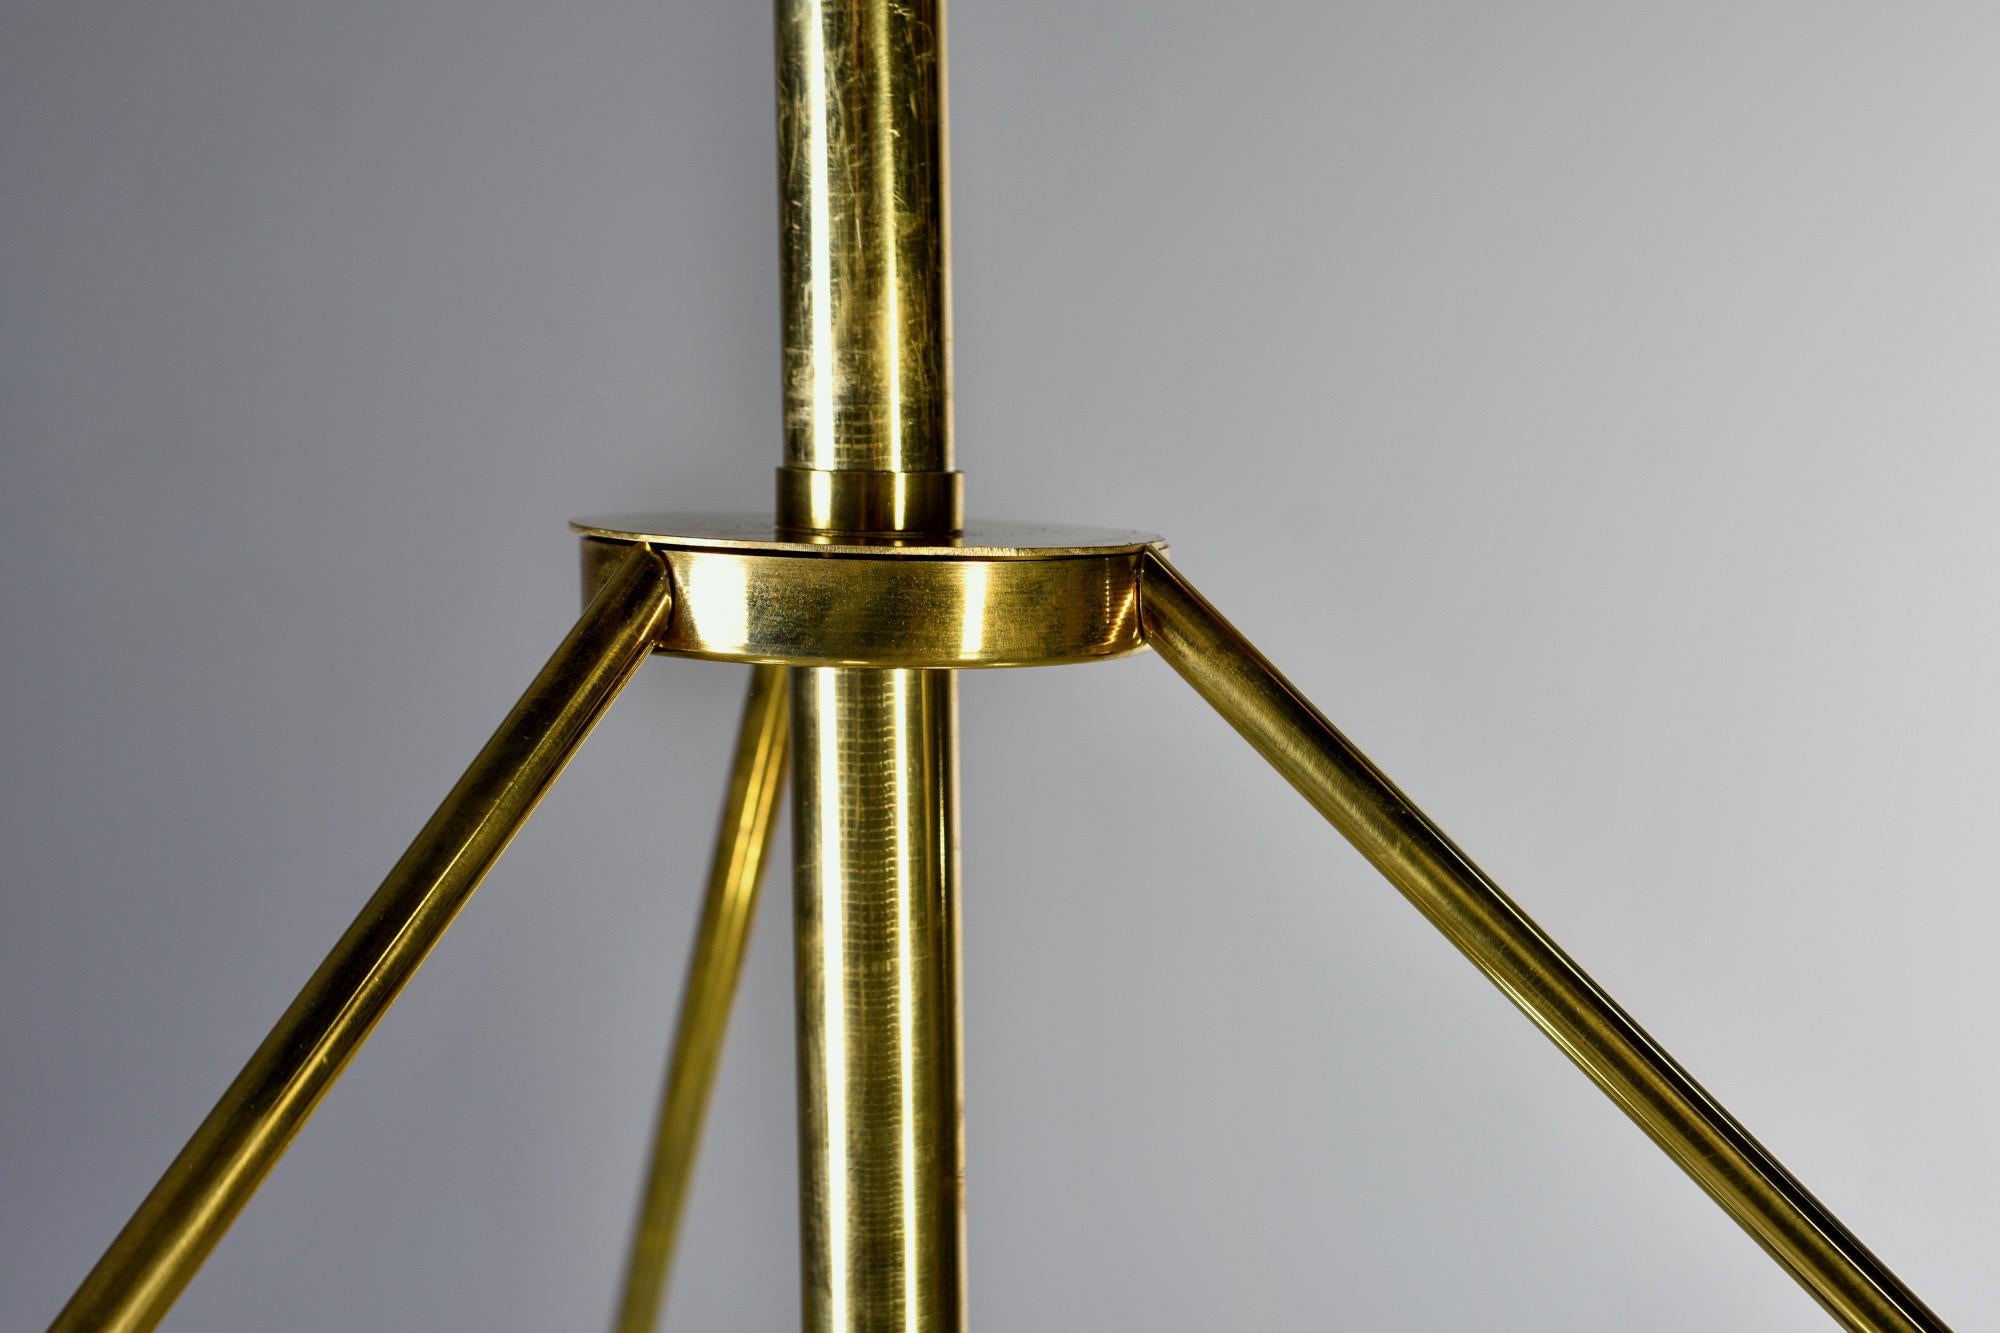 Contemporary Italian Deco Style Fixture with Polished Brass and Glass Rod Frame